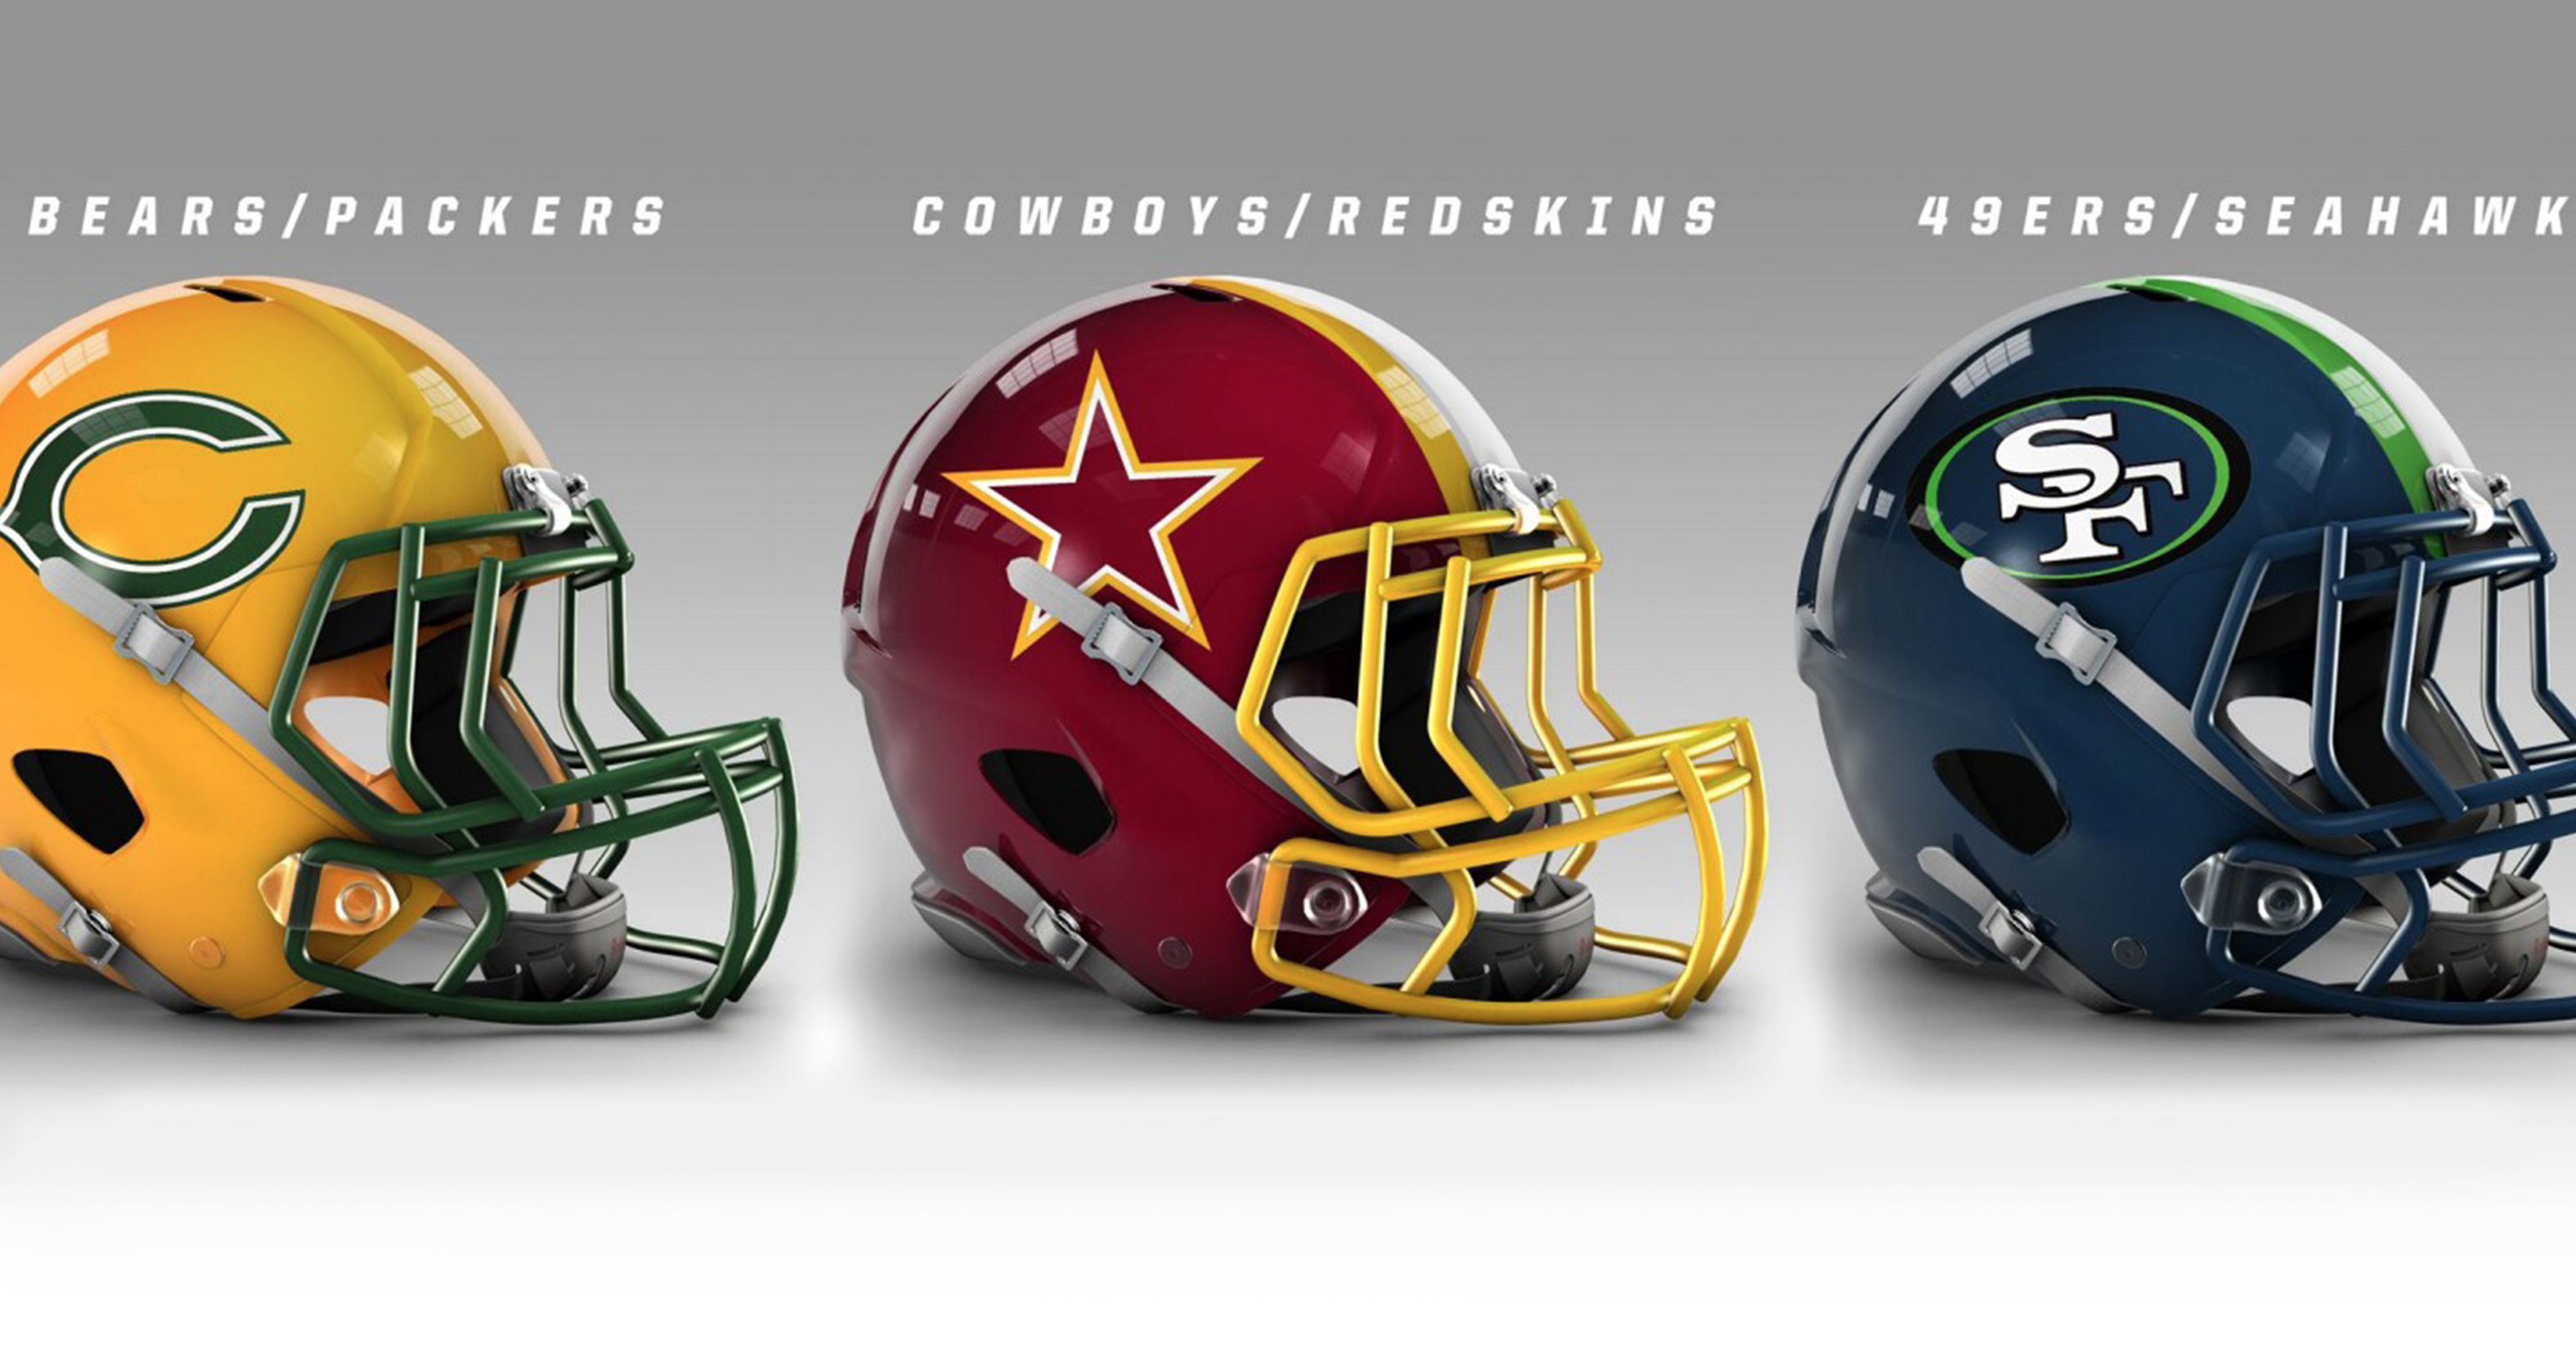 Helmets For Every NFL Team In Their Biggest Rival’s Colors - Daily Snark